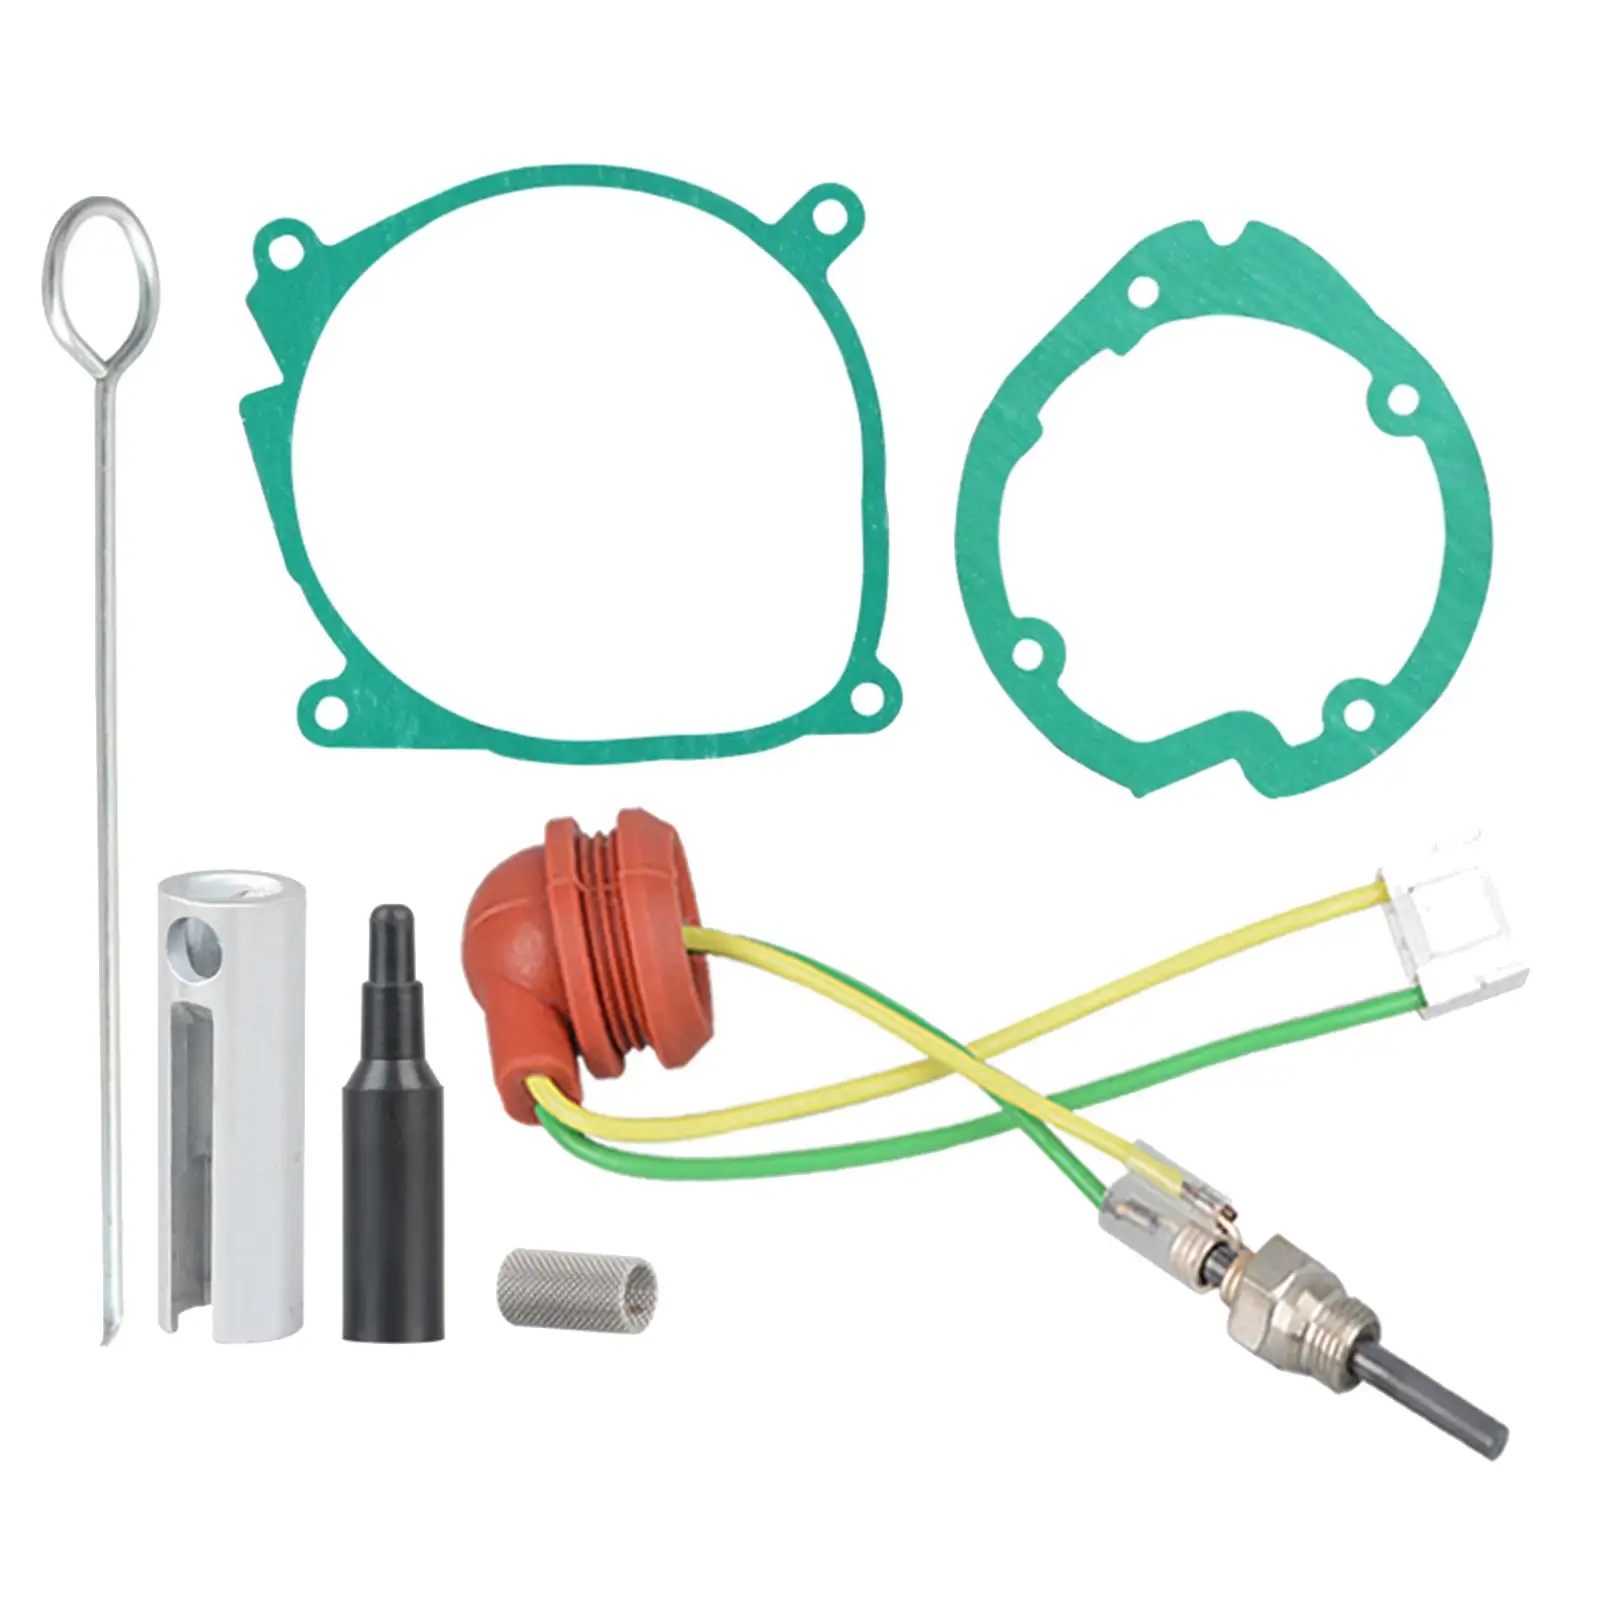 Glow Plug Repair Kit Truck Replaces Wrench for 24V 5kW Parking Heater